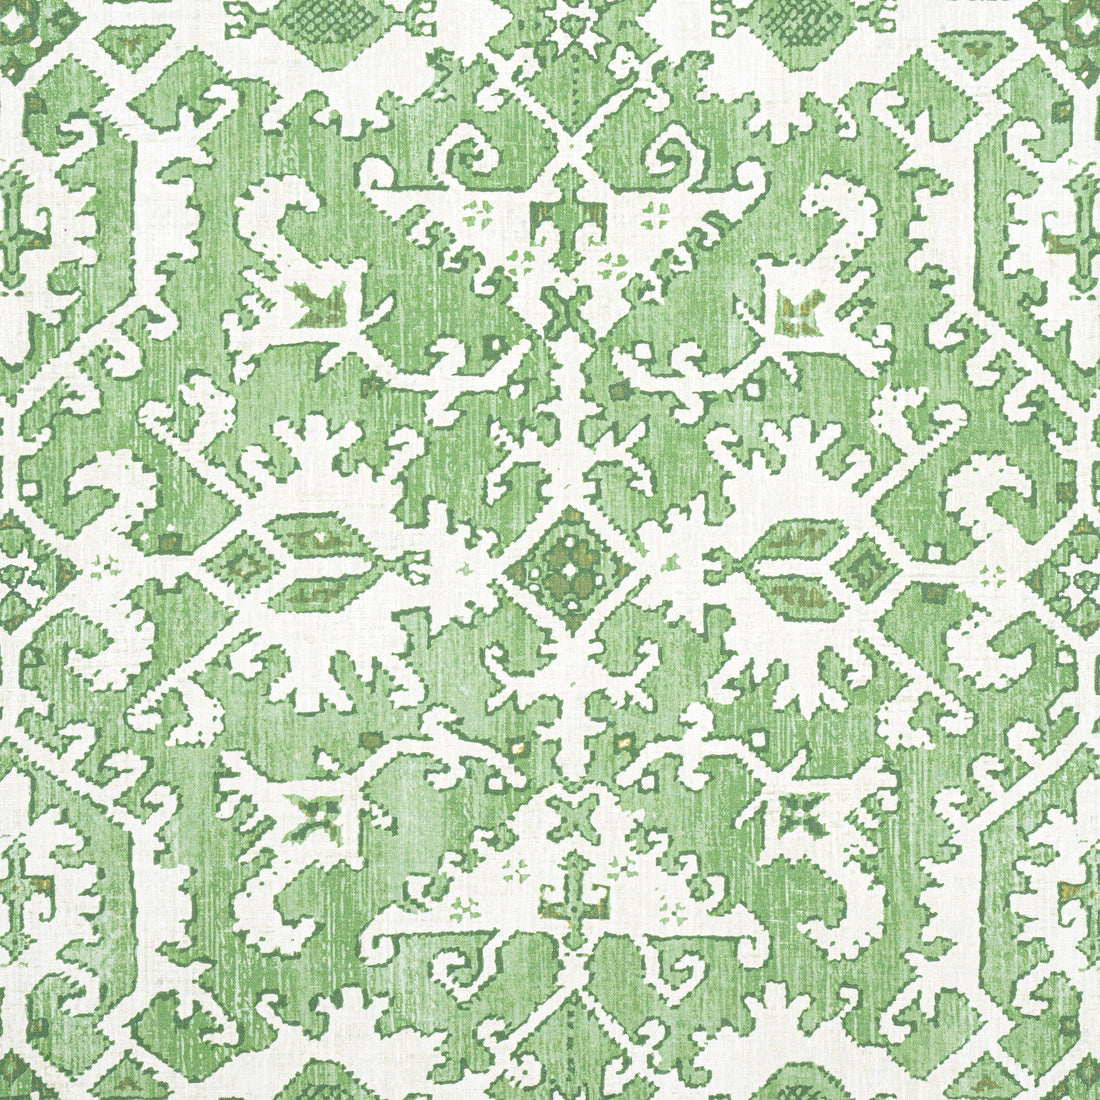 Pontorma fabric in Kelly color - pattern number AF24557 - by Anna French in the Devon collection